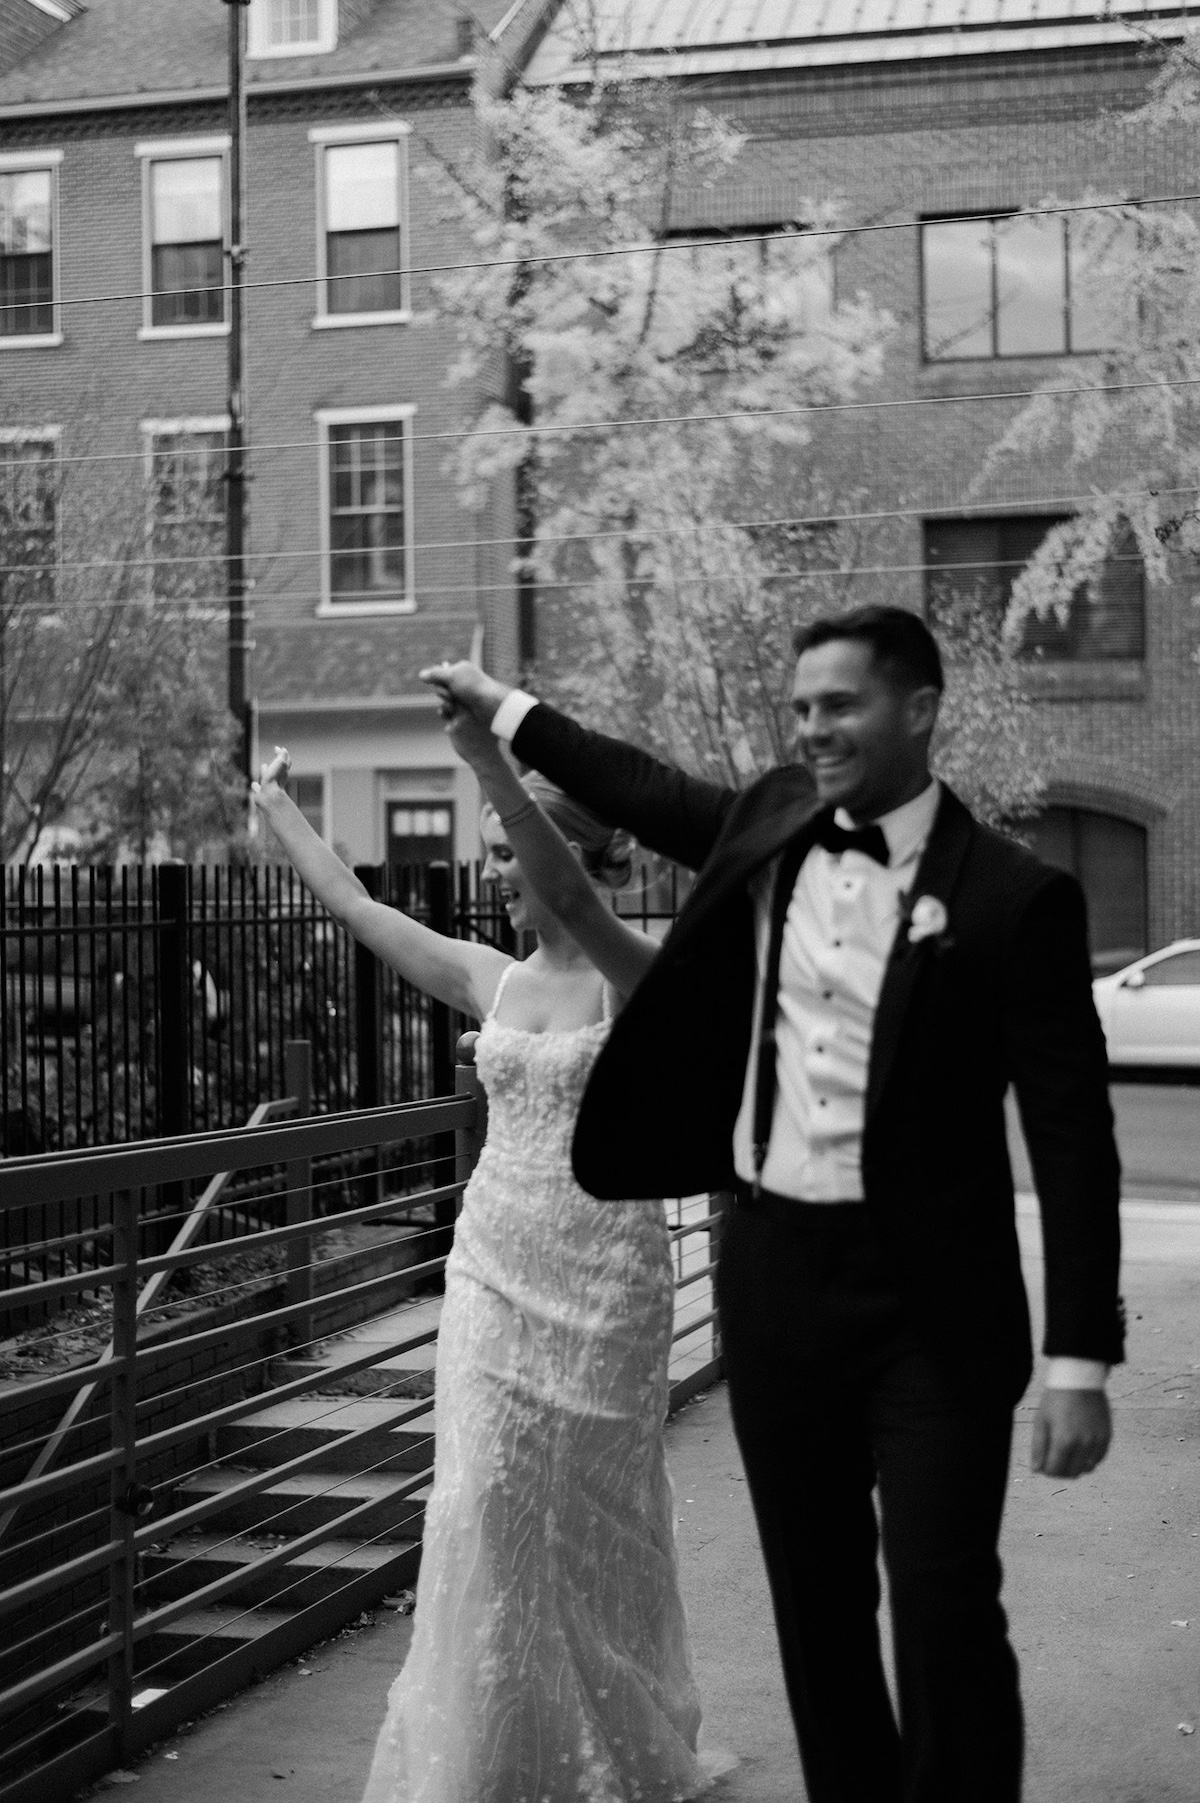 Kelly and Adam make a grand entrance at Excelsior's reception, setting the tone for an evening filled with celebration and joy.